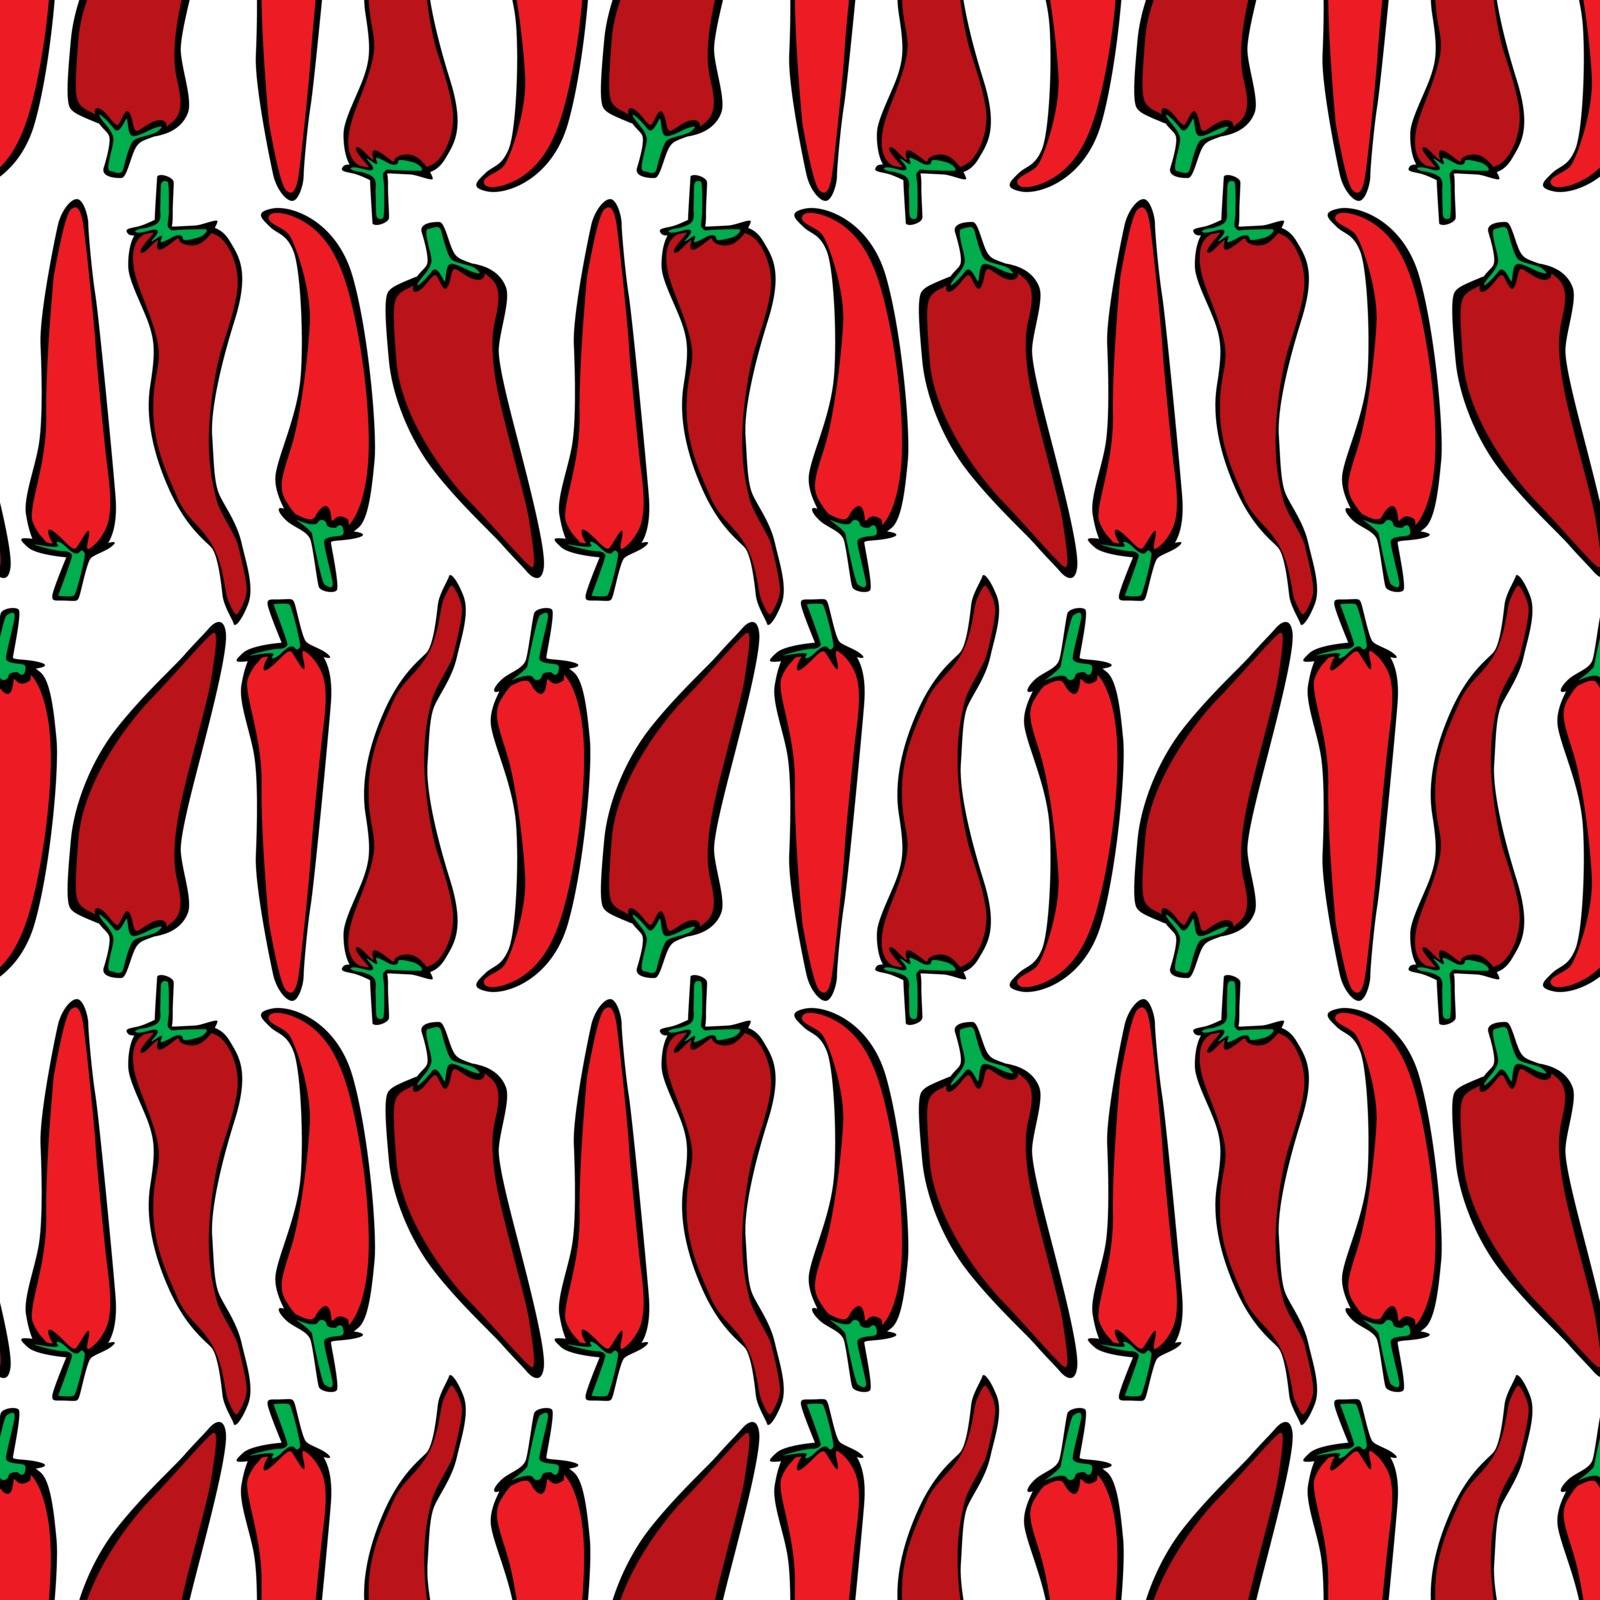 Chilli peppers pattern by nahhan